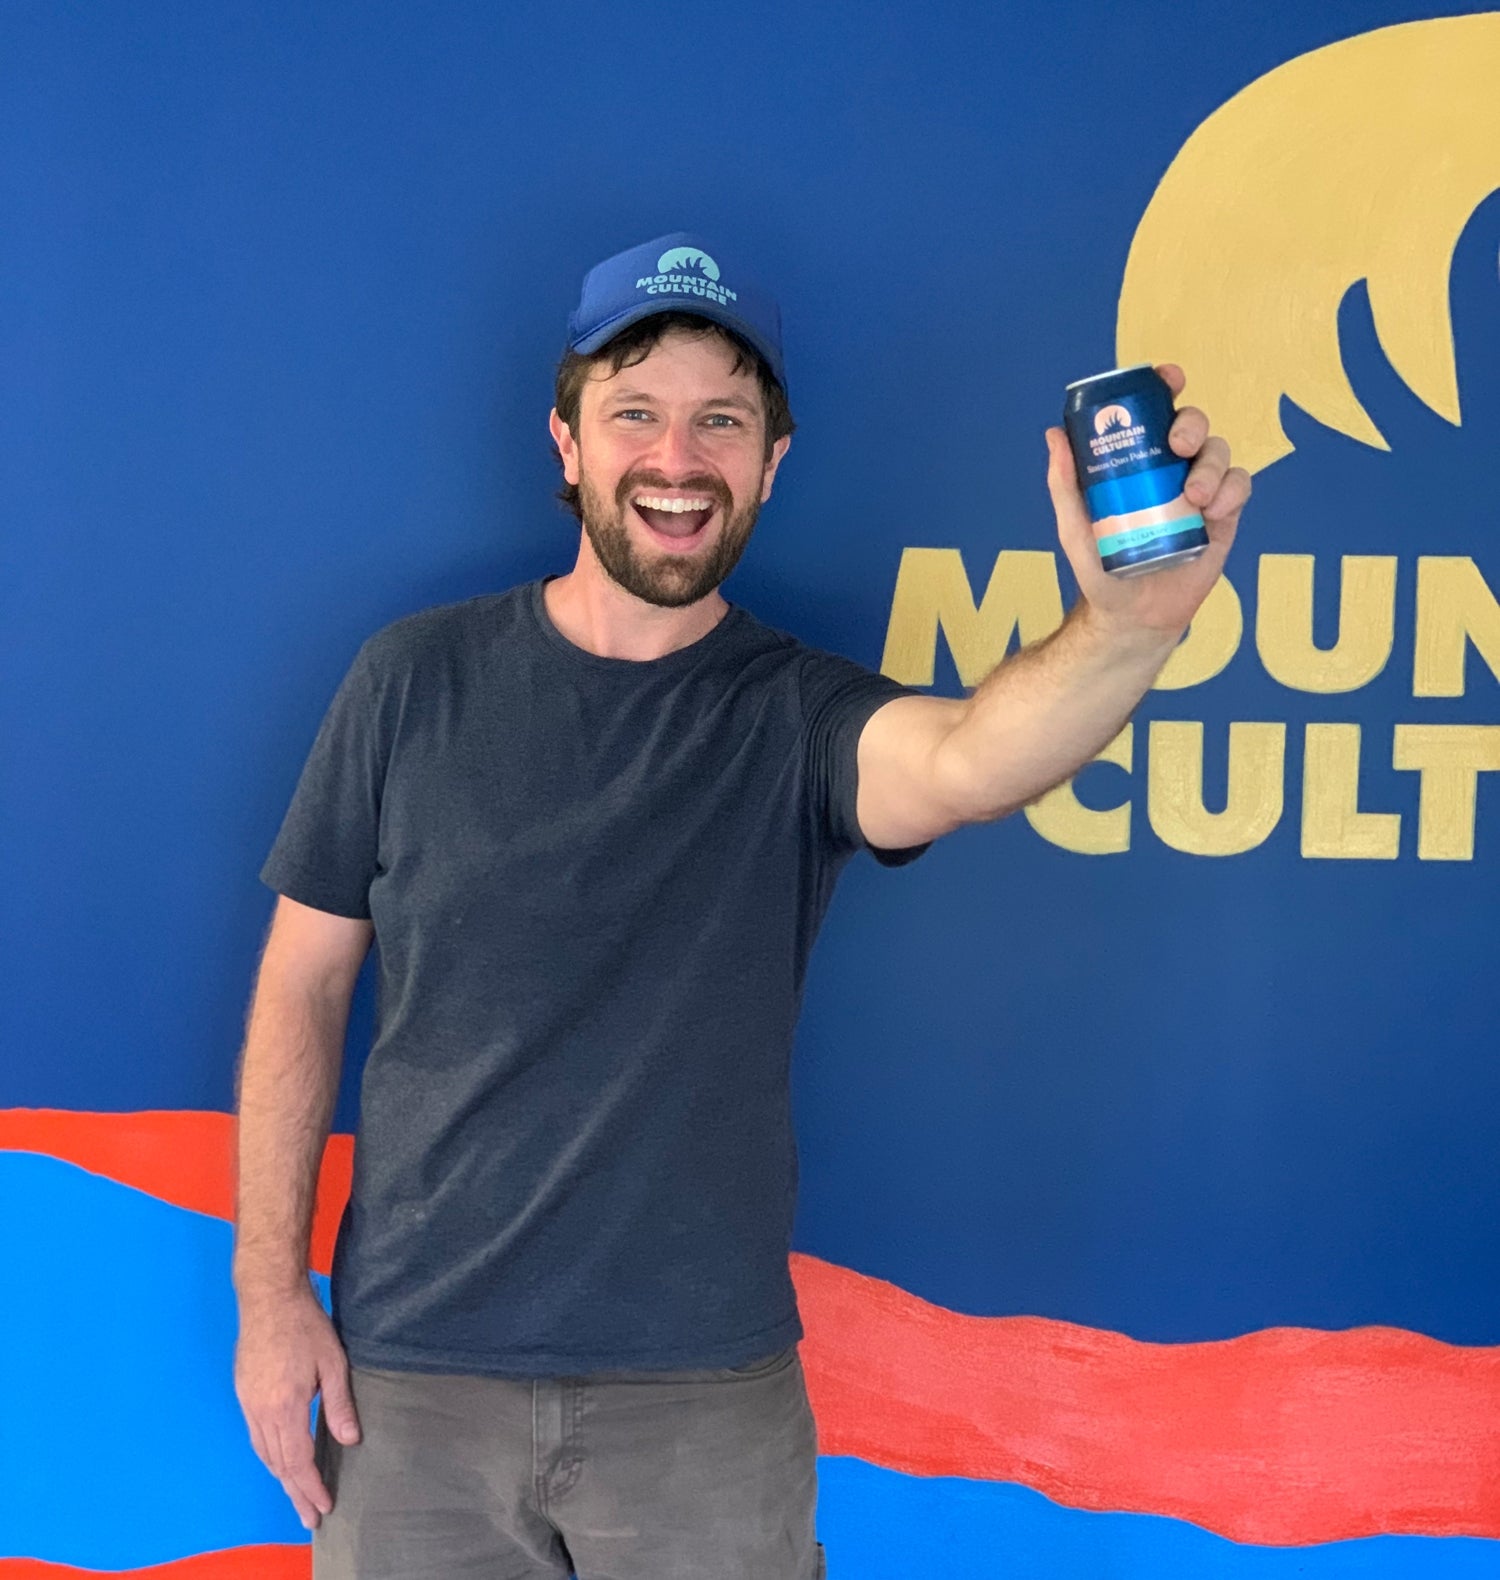 Best craft beer of 2021 - DJ at Mountain Culture